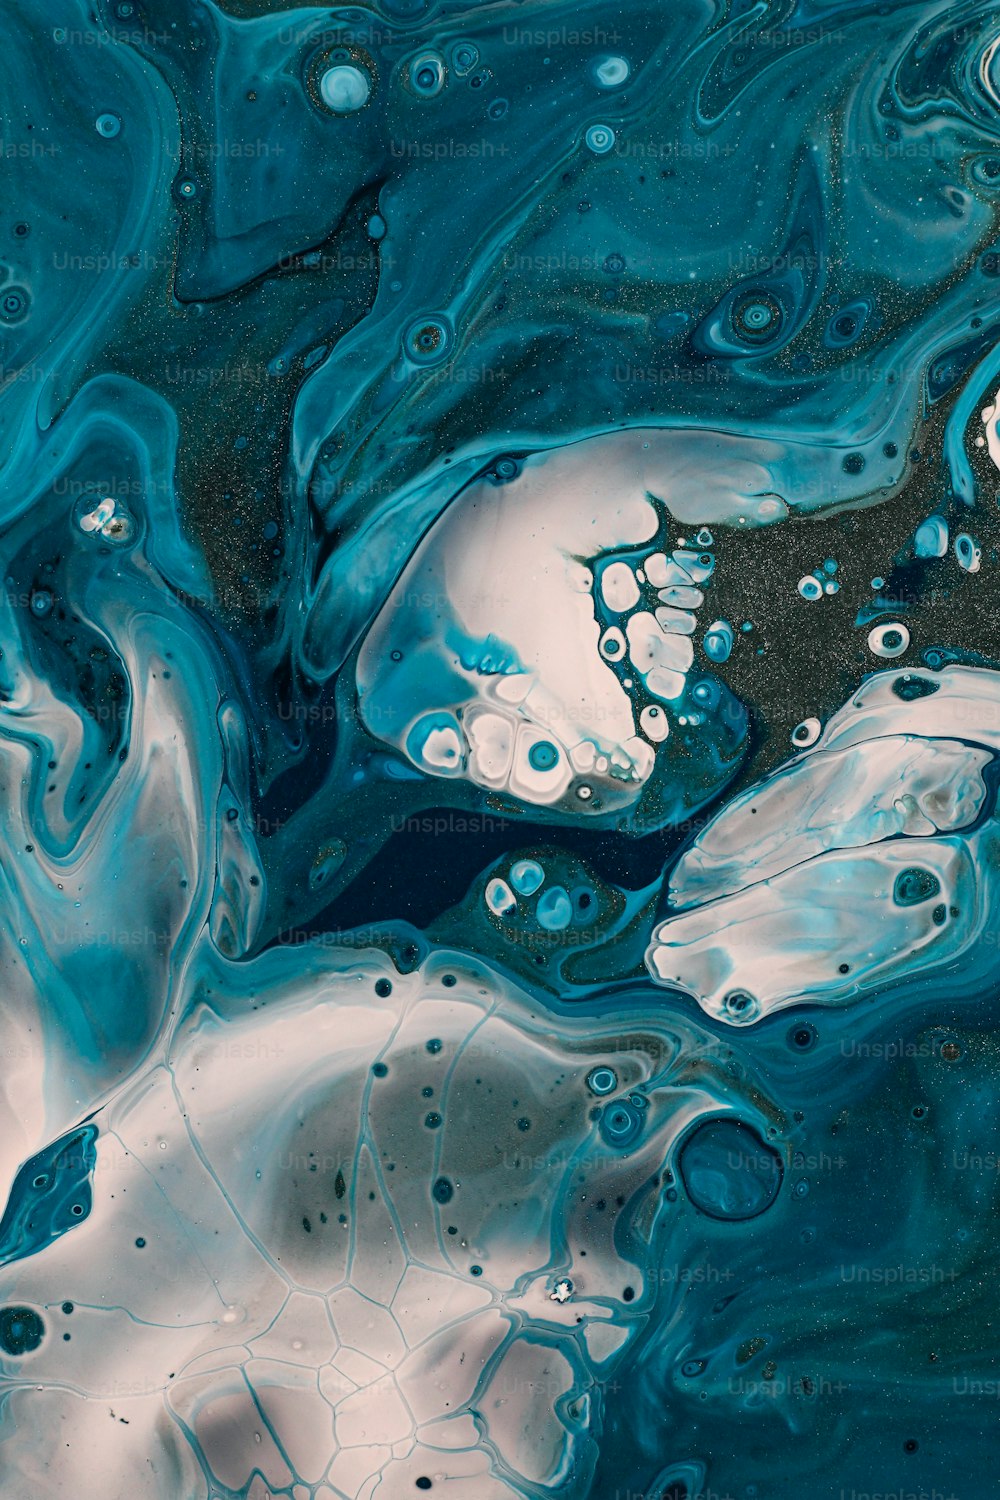 a close up of a blue and white liquid